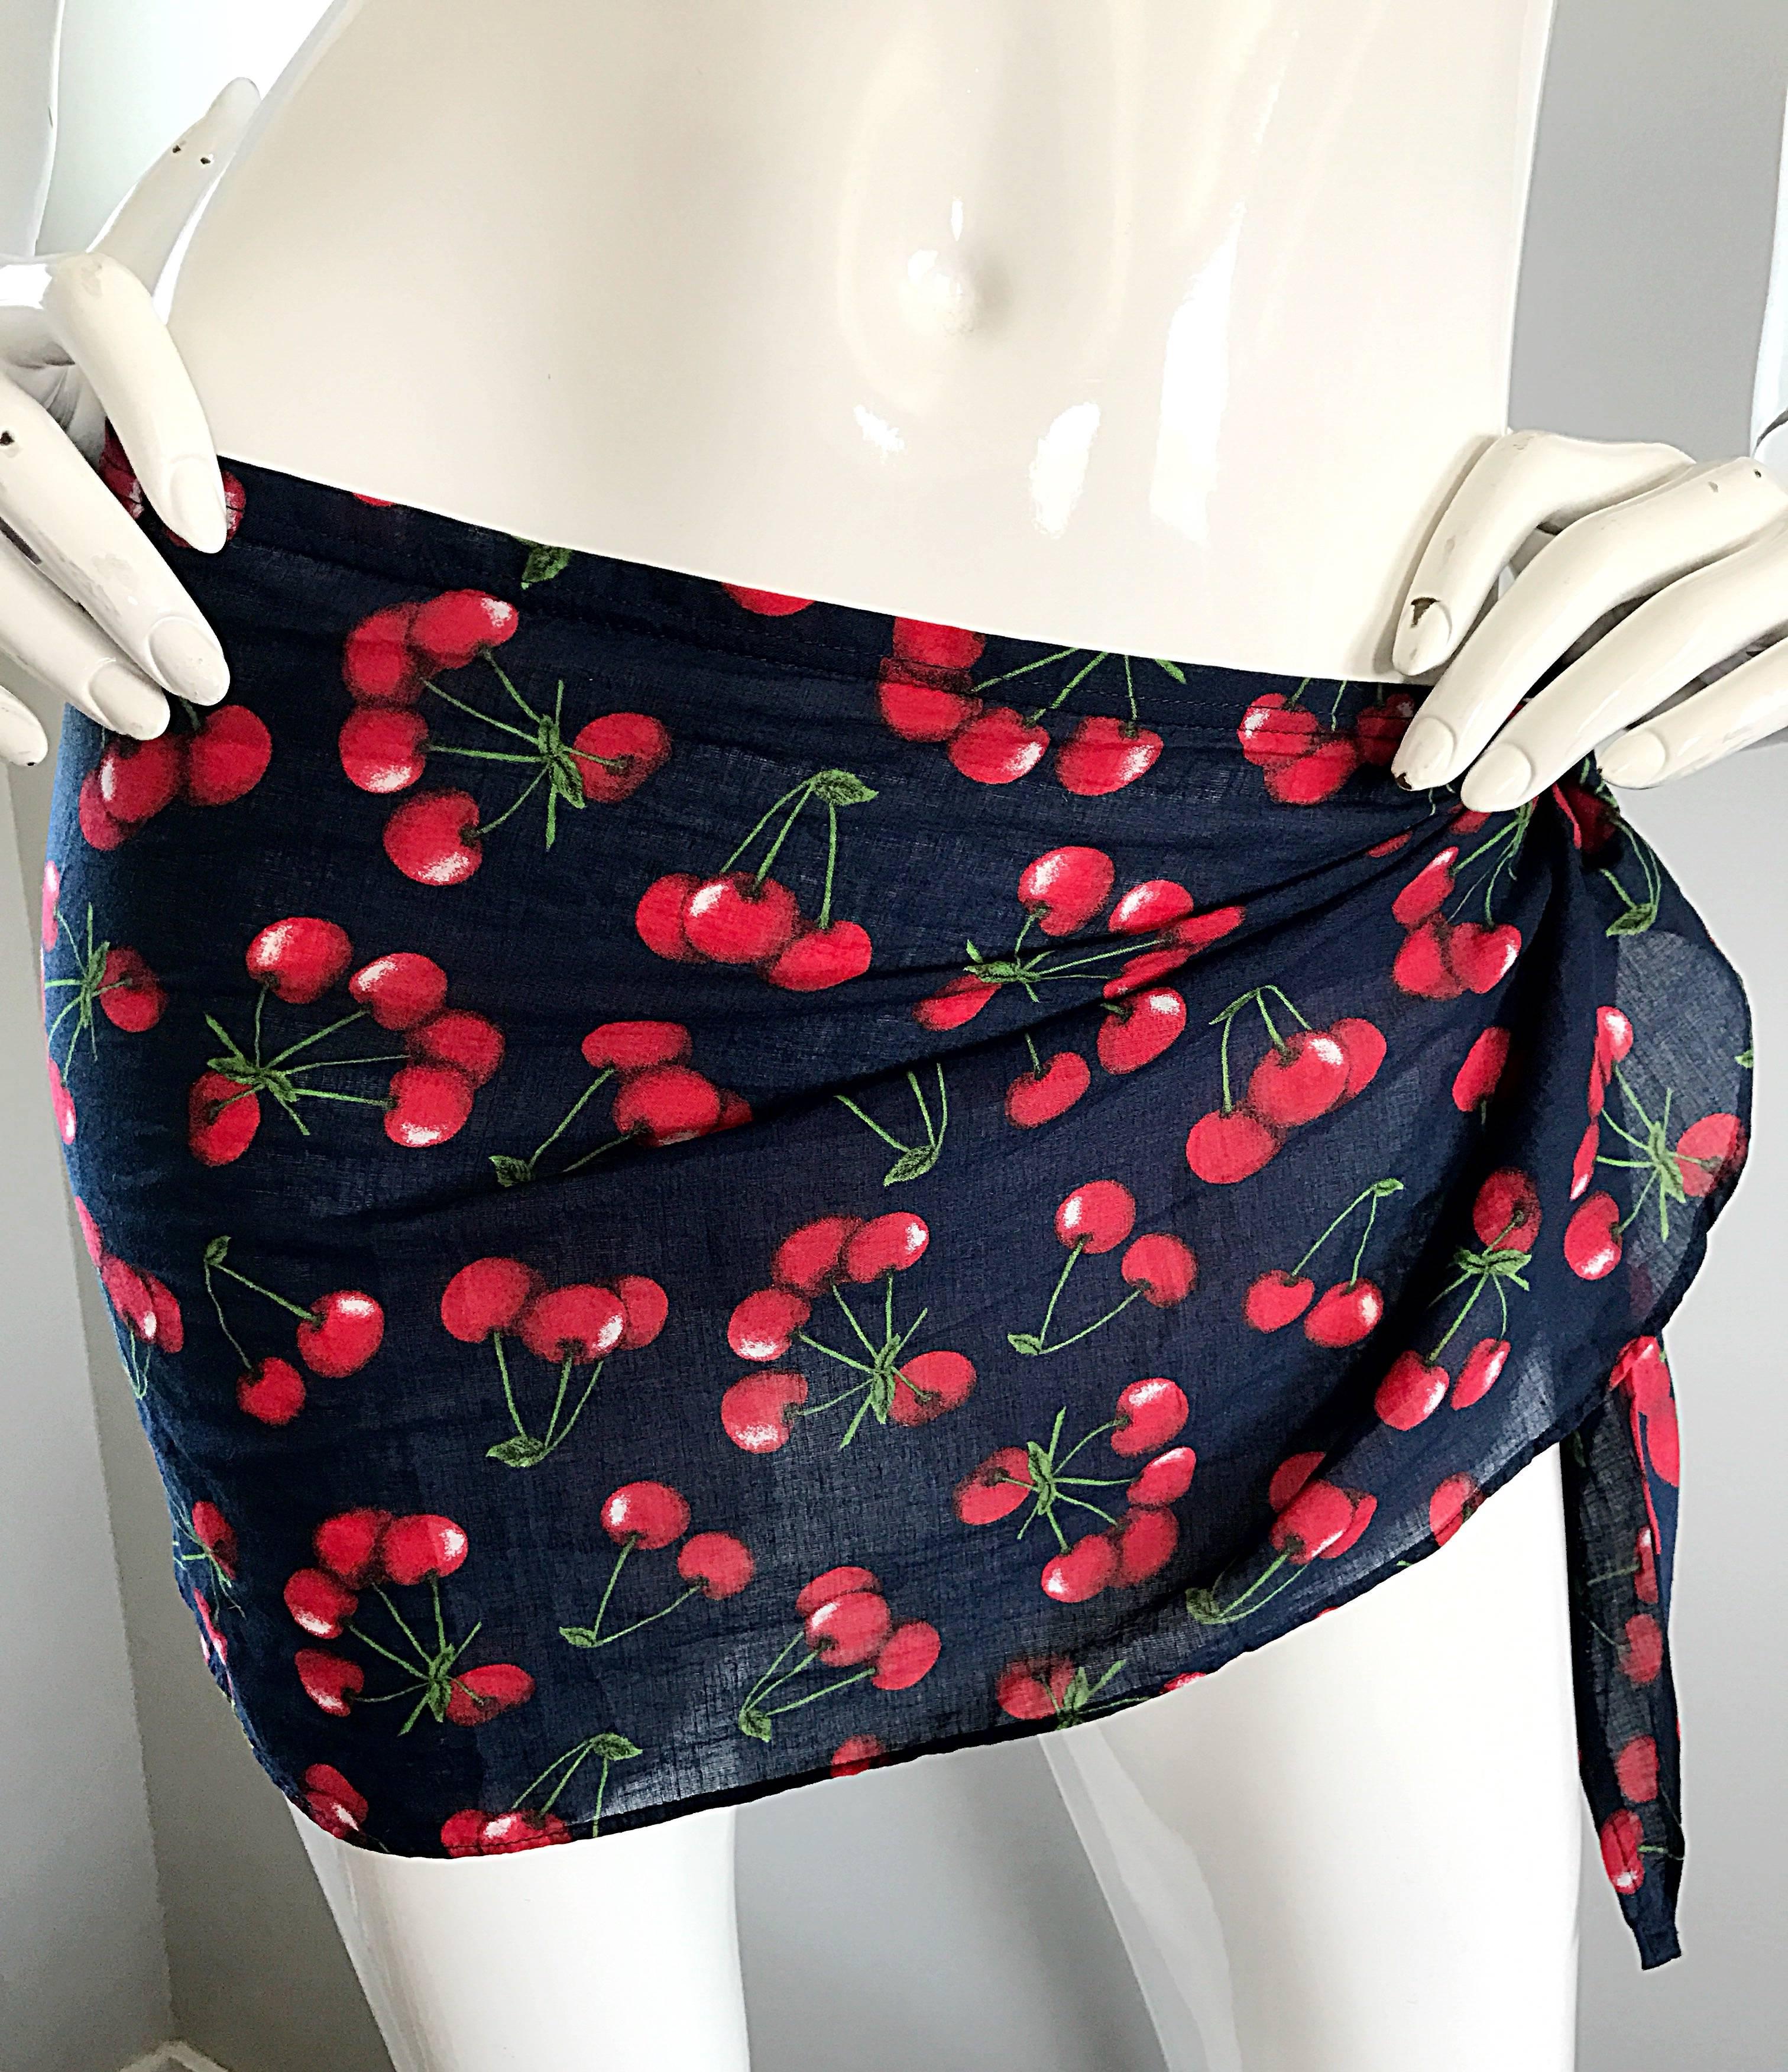 NWT 1990s Dolce and Gabbana Black and Red Cherry Print Swimsuit Cover Up Skirt 1